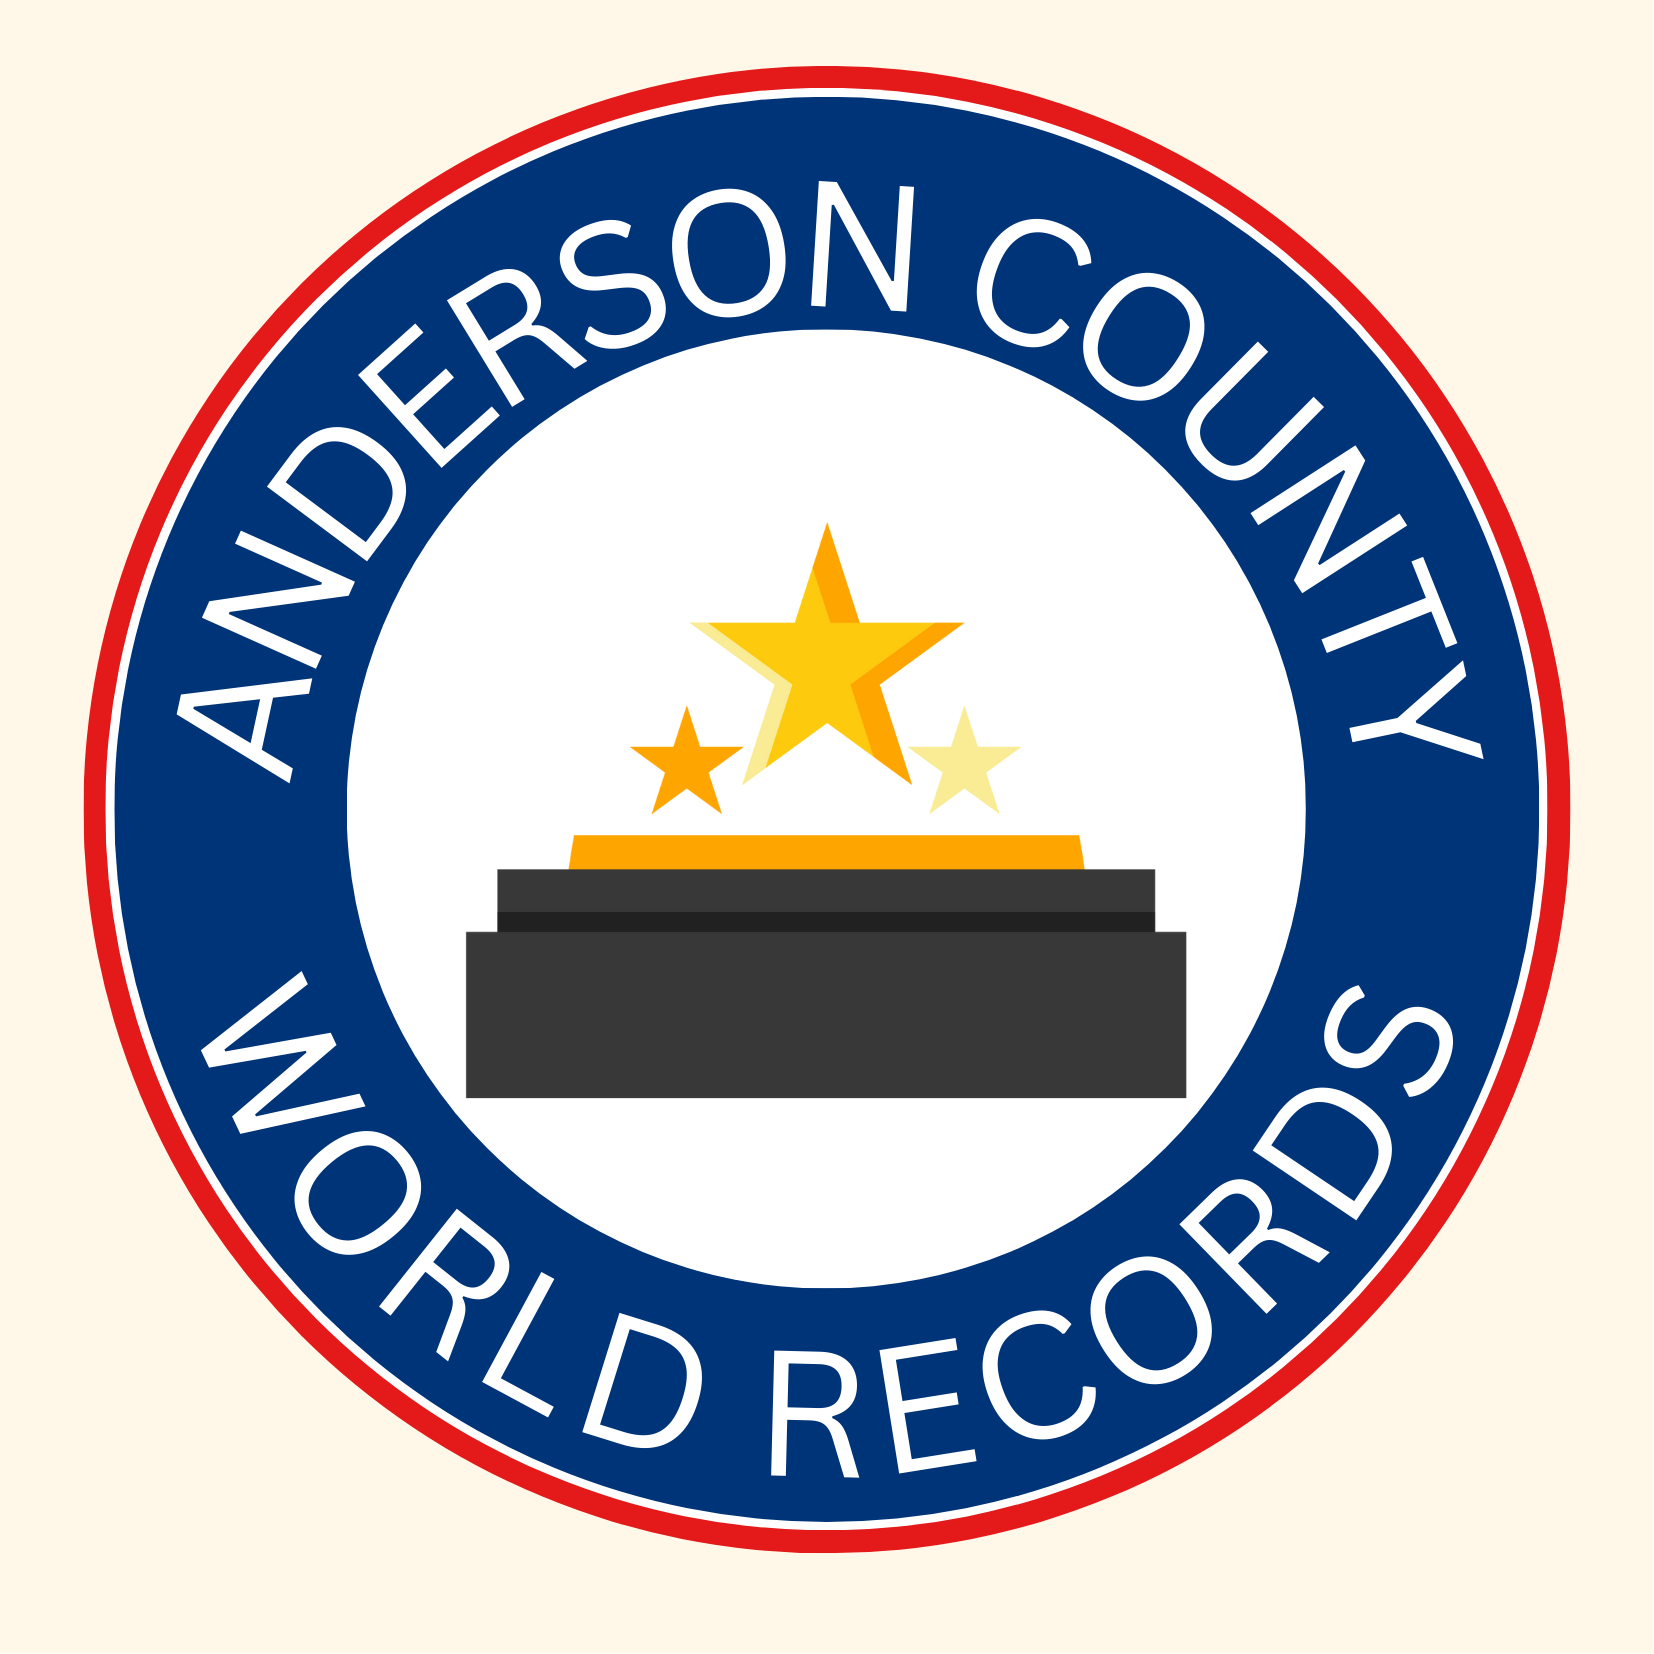 Red white and blue stacked circles with star trophy in middle and Anderson County World Records around it